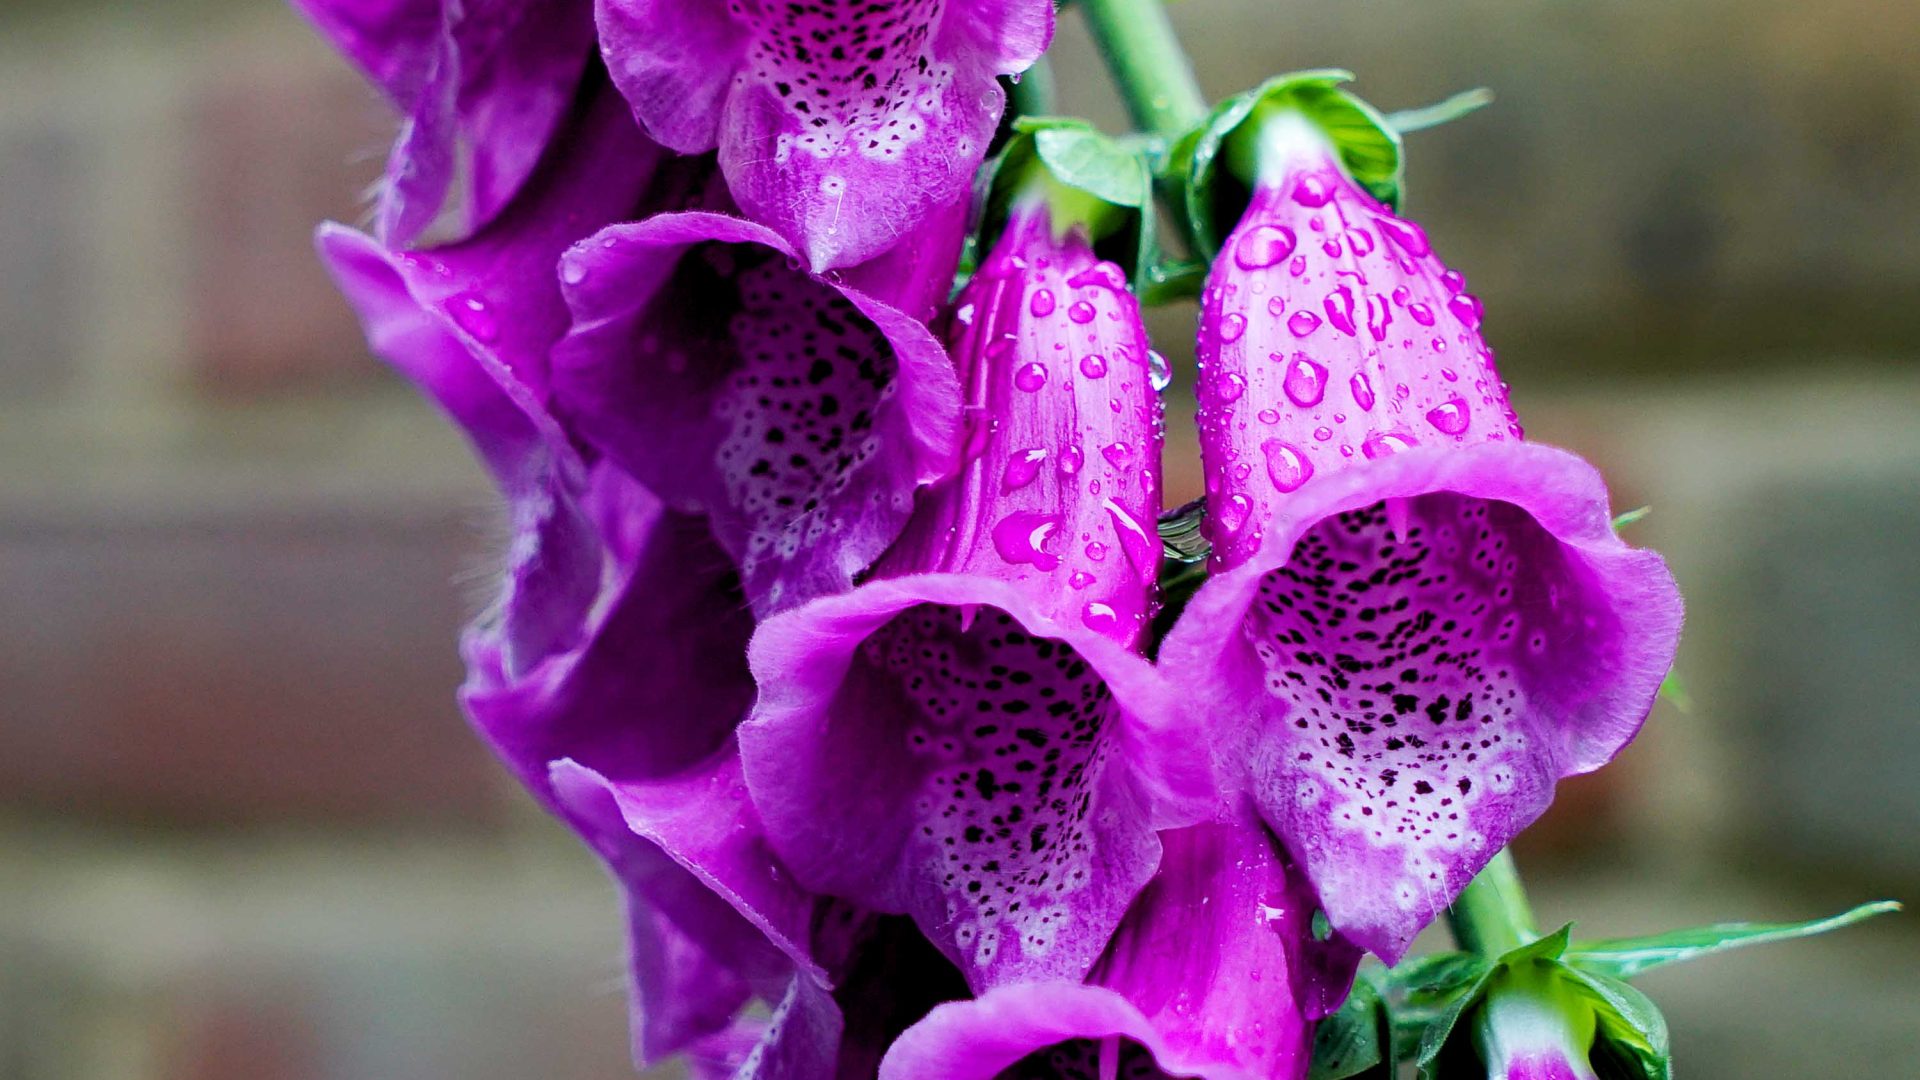 Purple flowers covered in drops of dew.